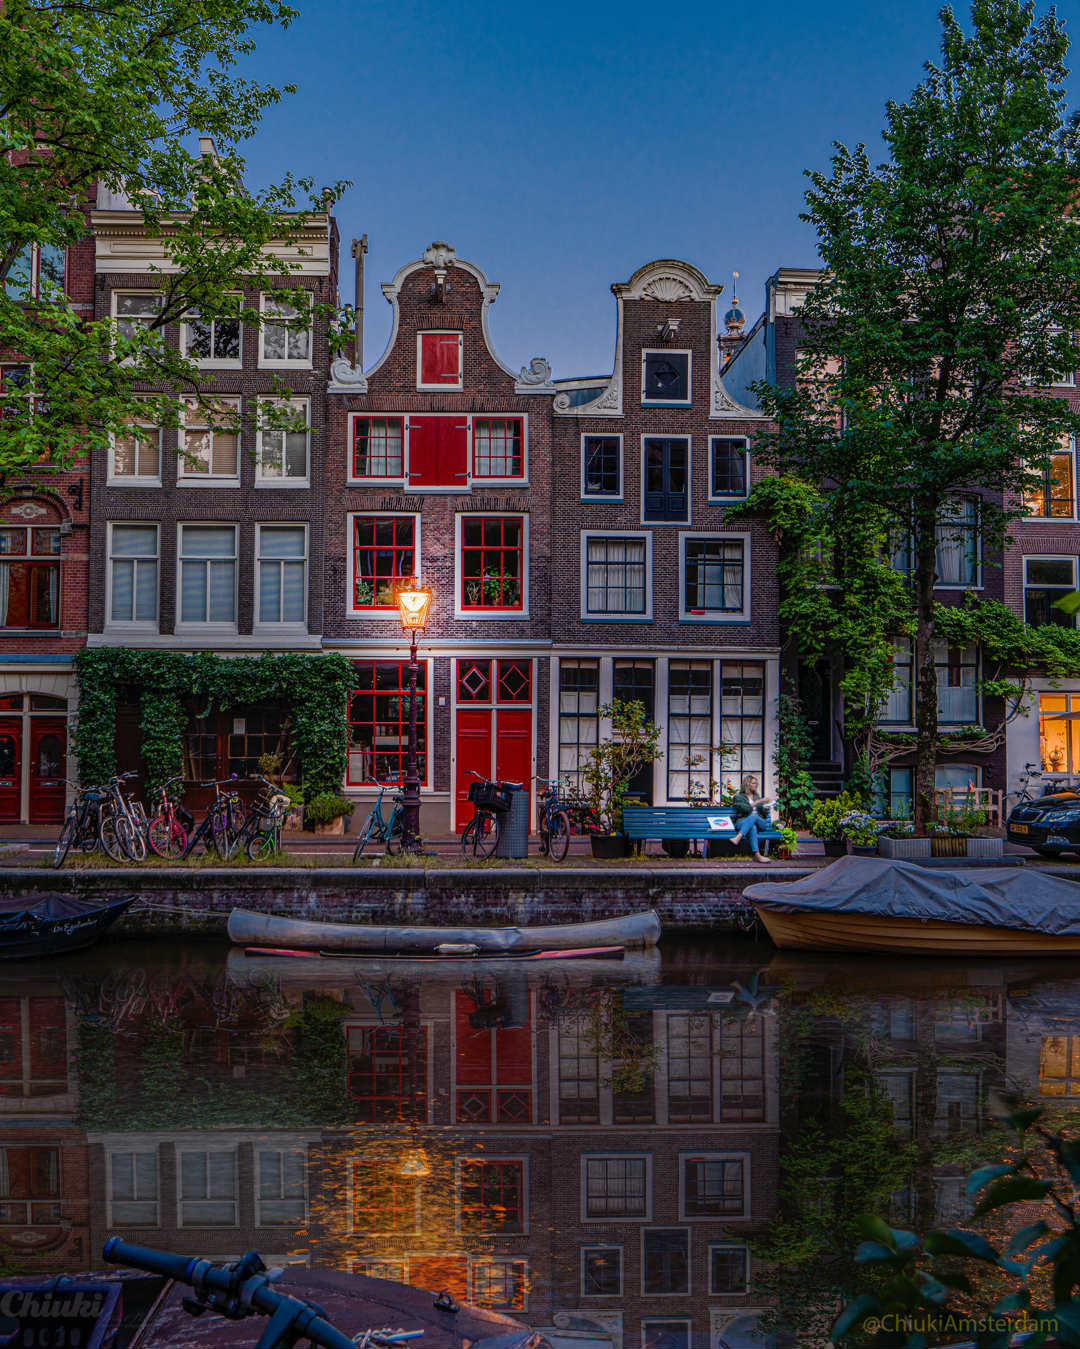 City Guide to Amsterdam